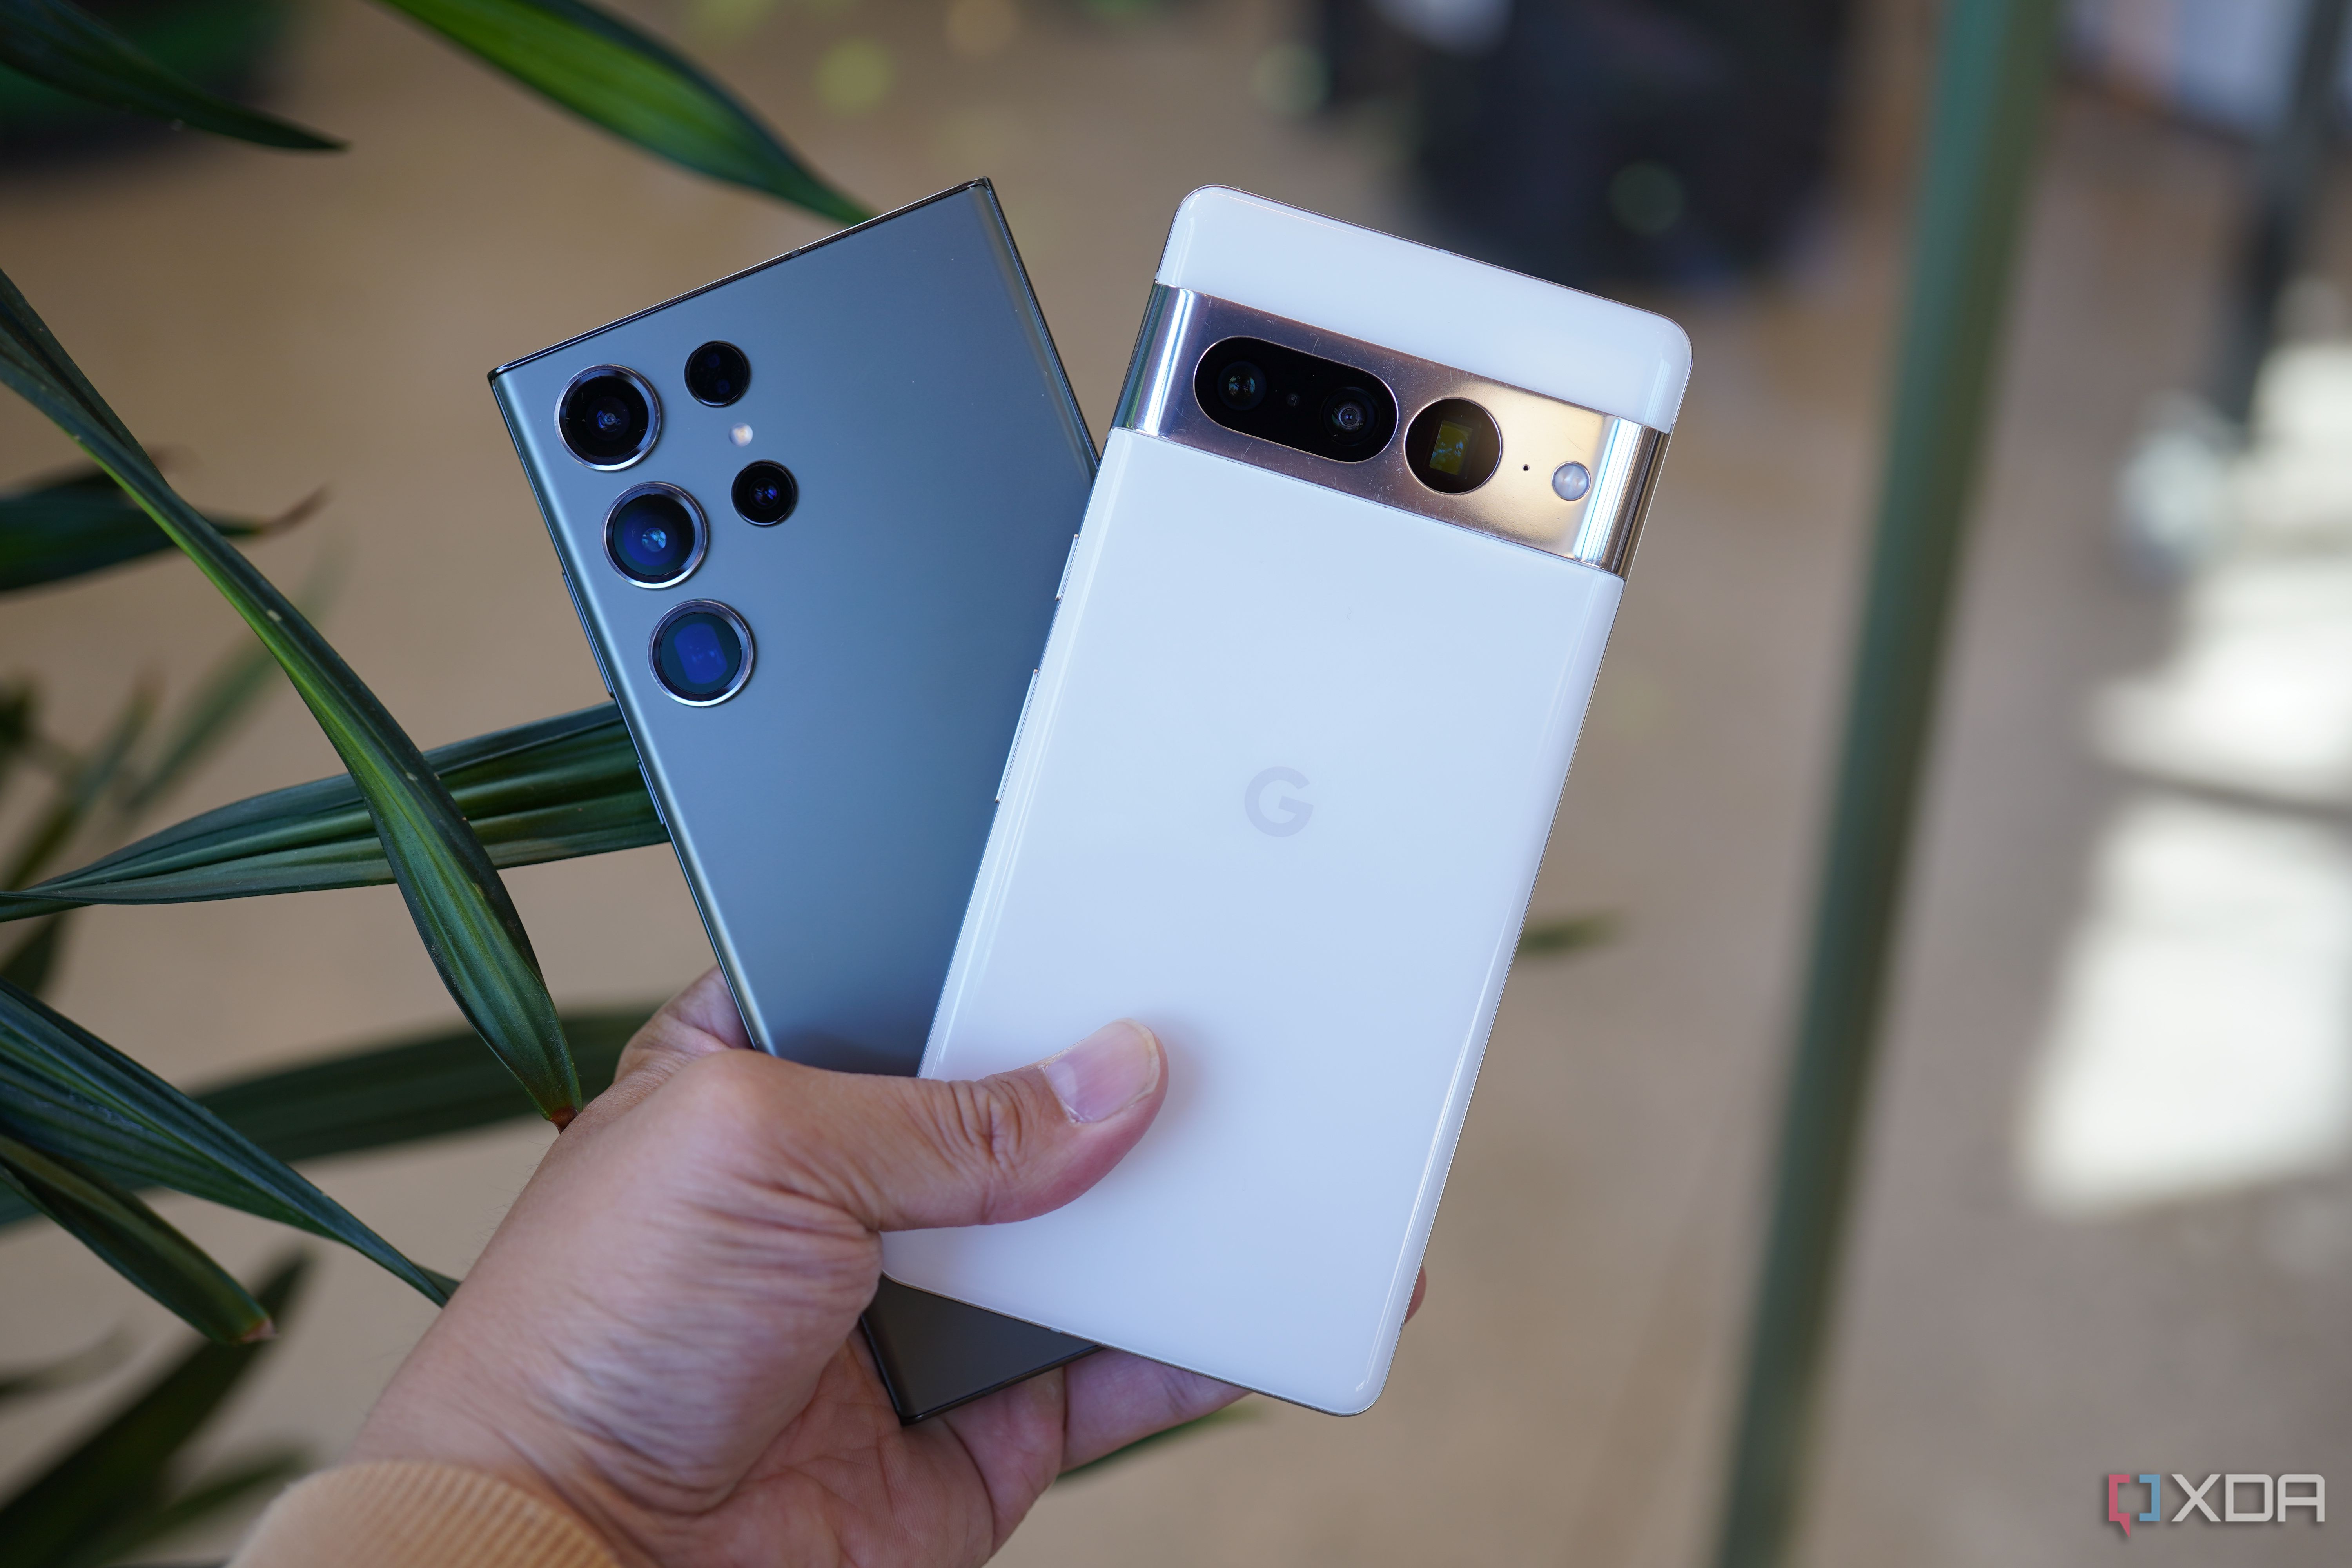 Samsung Galaxy S23 Ultra vs. Google Pixel 7 Pro: Which Android phone wins?